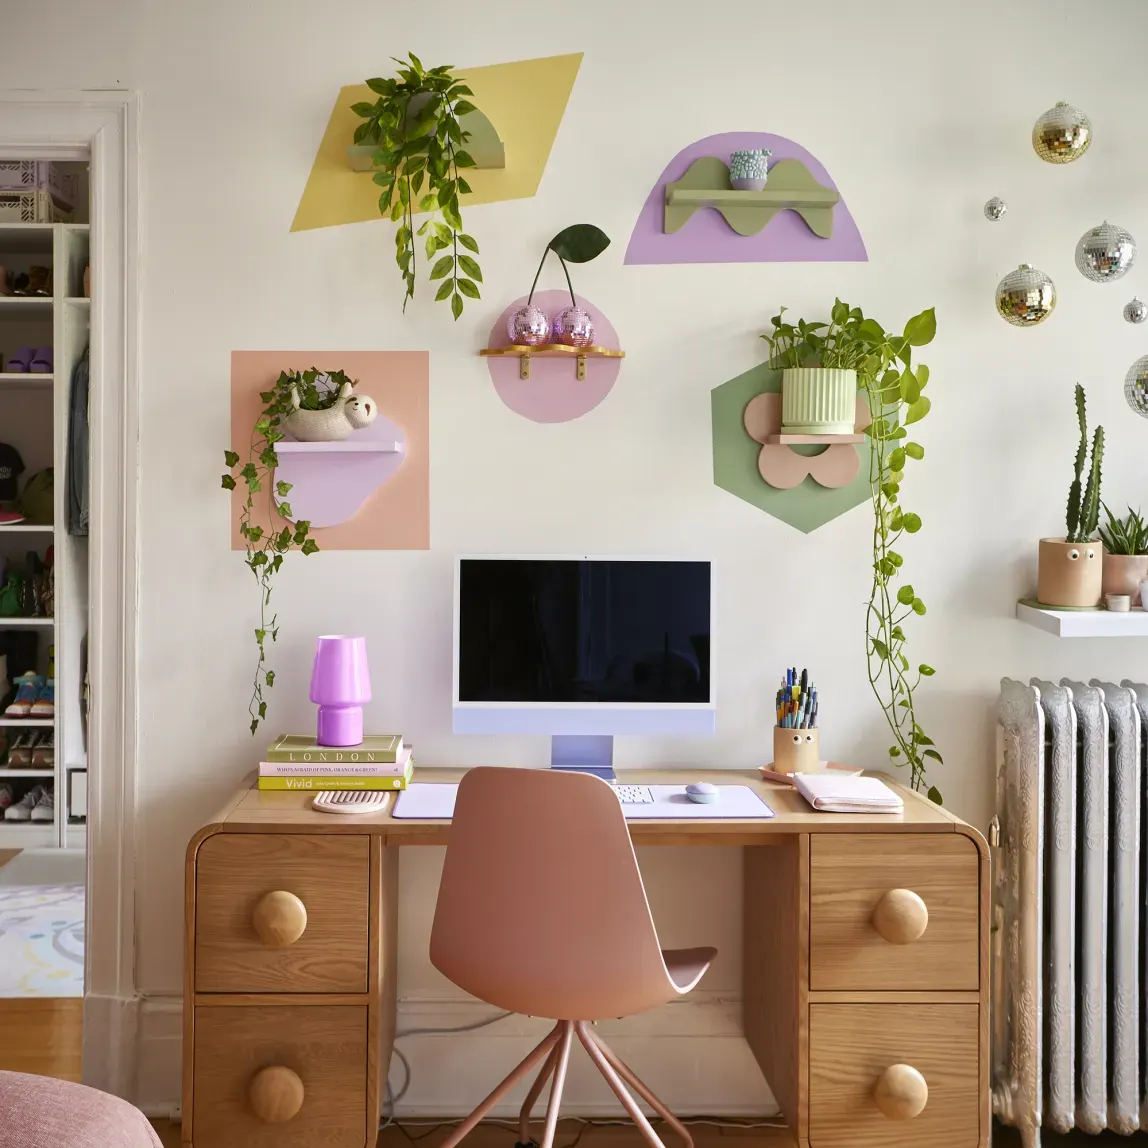 21 Desk Organization Ideas for an Aesthetic and Tidy Office